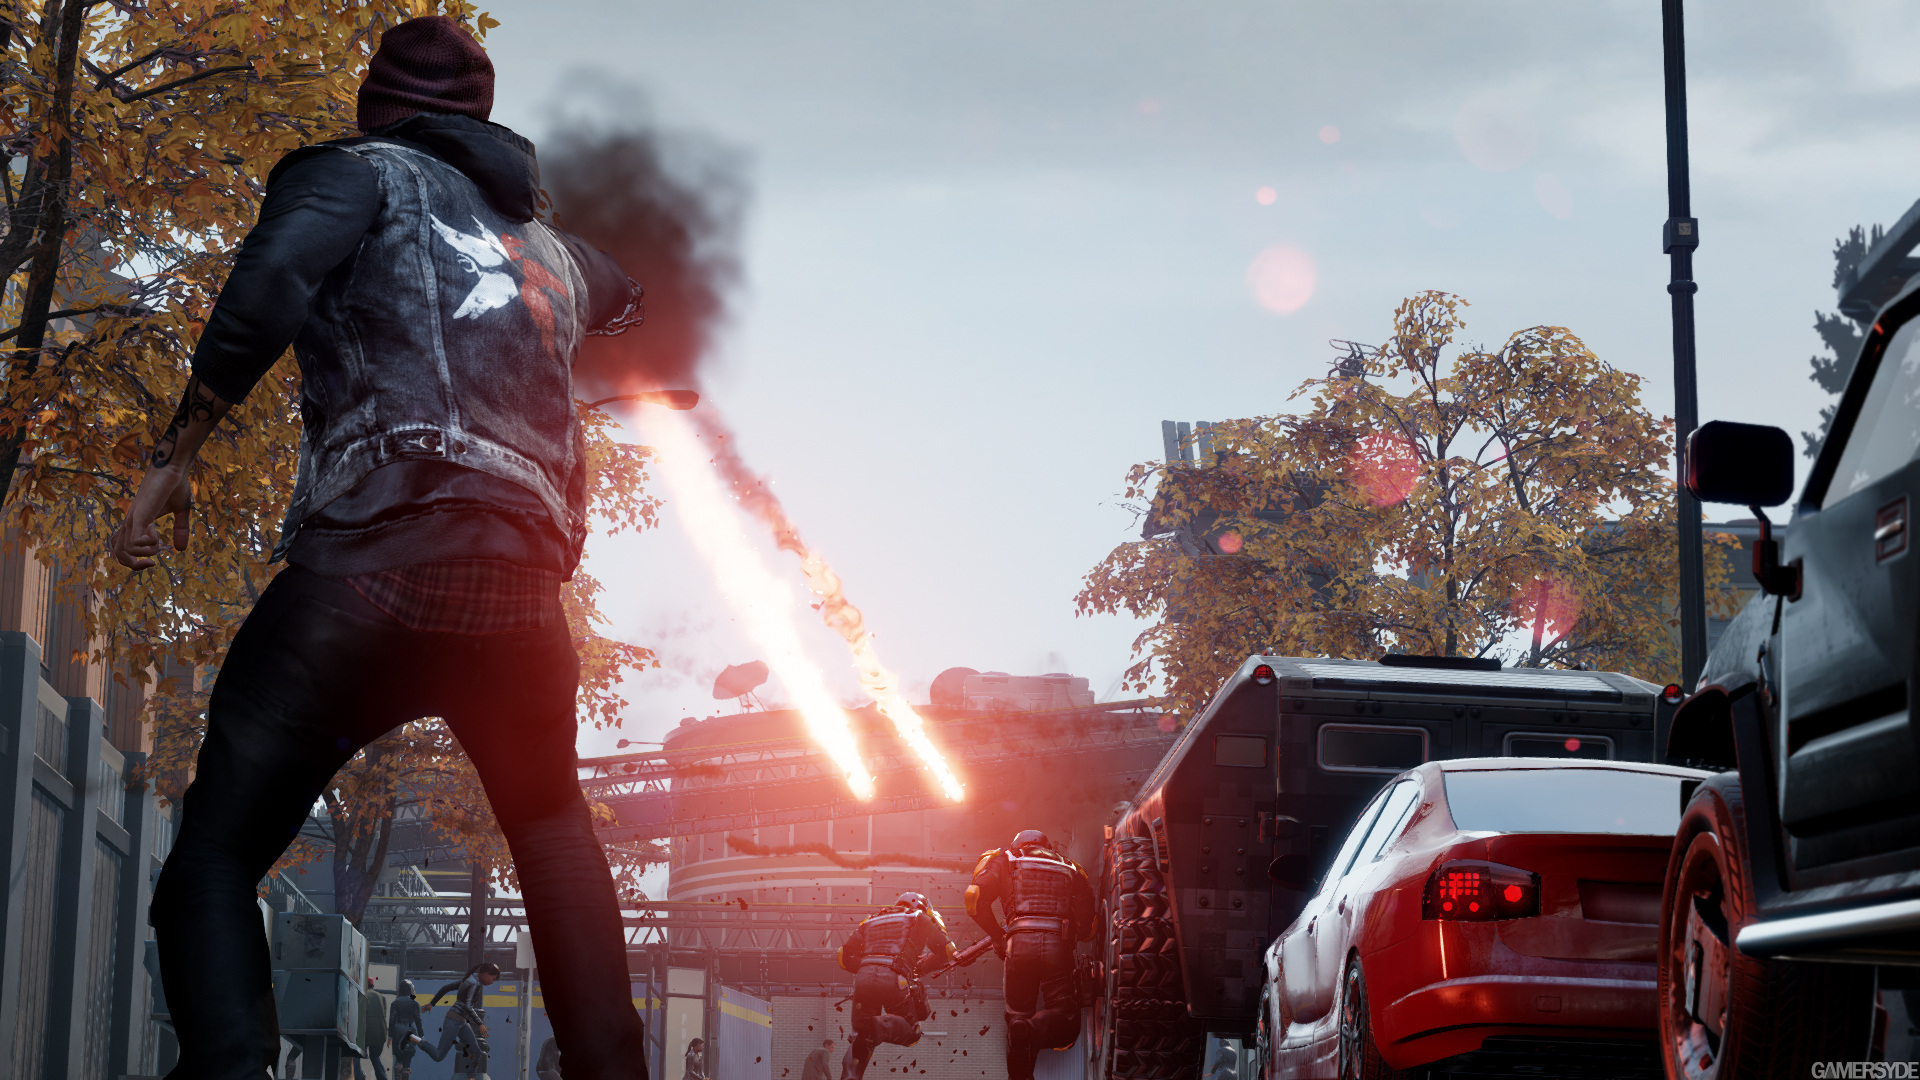 image_infamous_second_son-22142-2661_0002.jpg